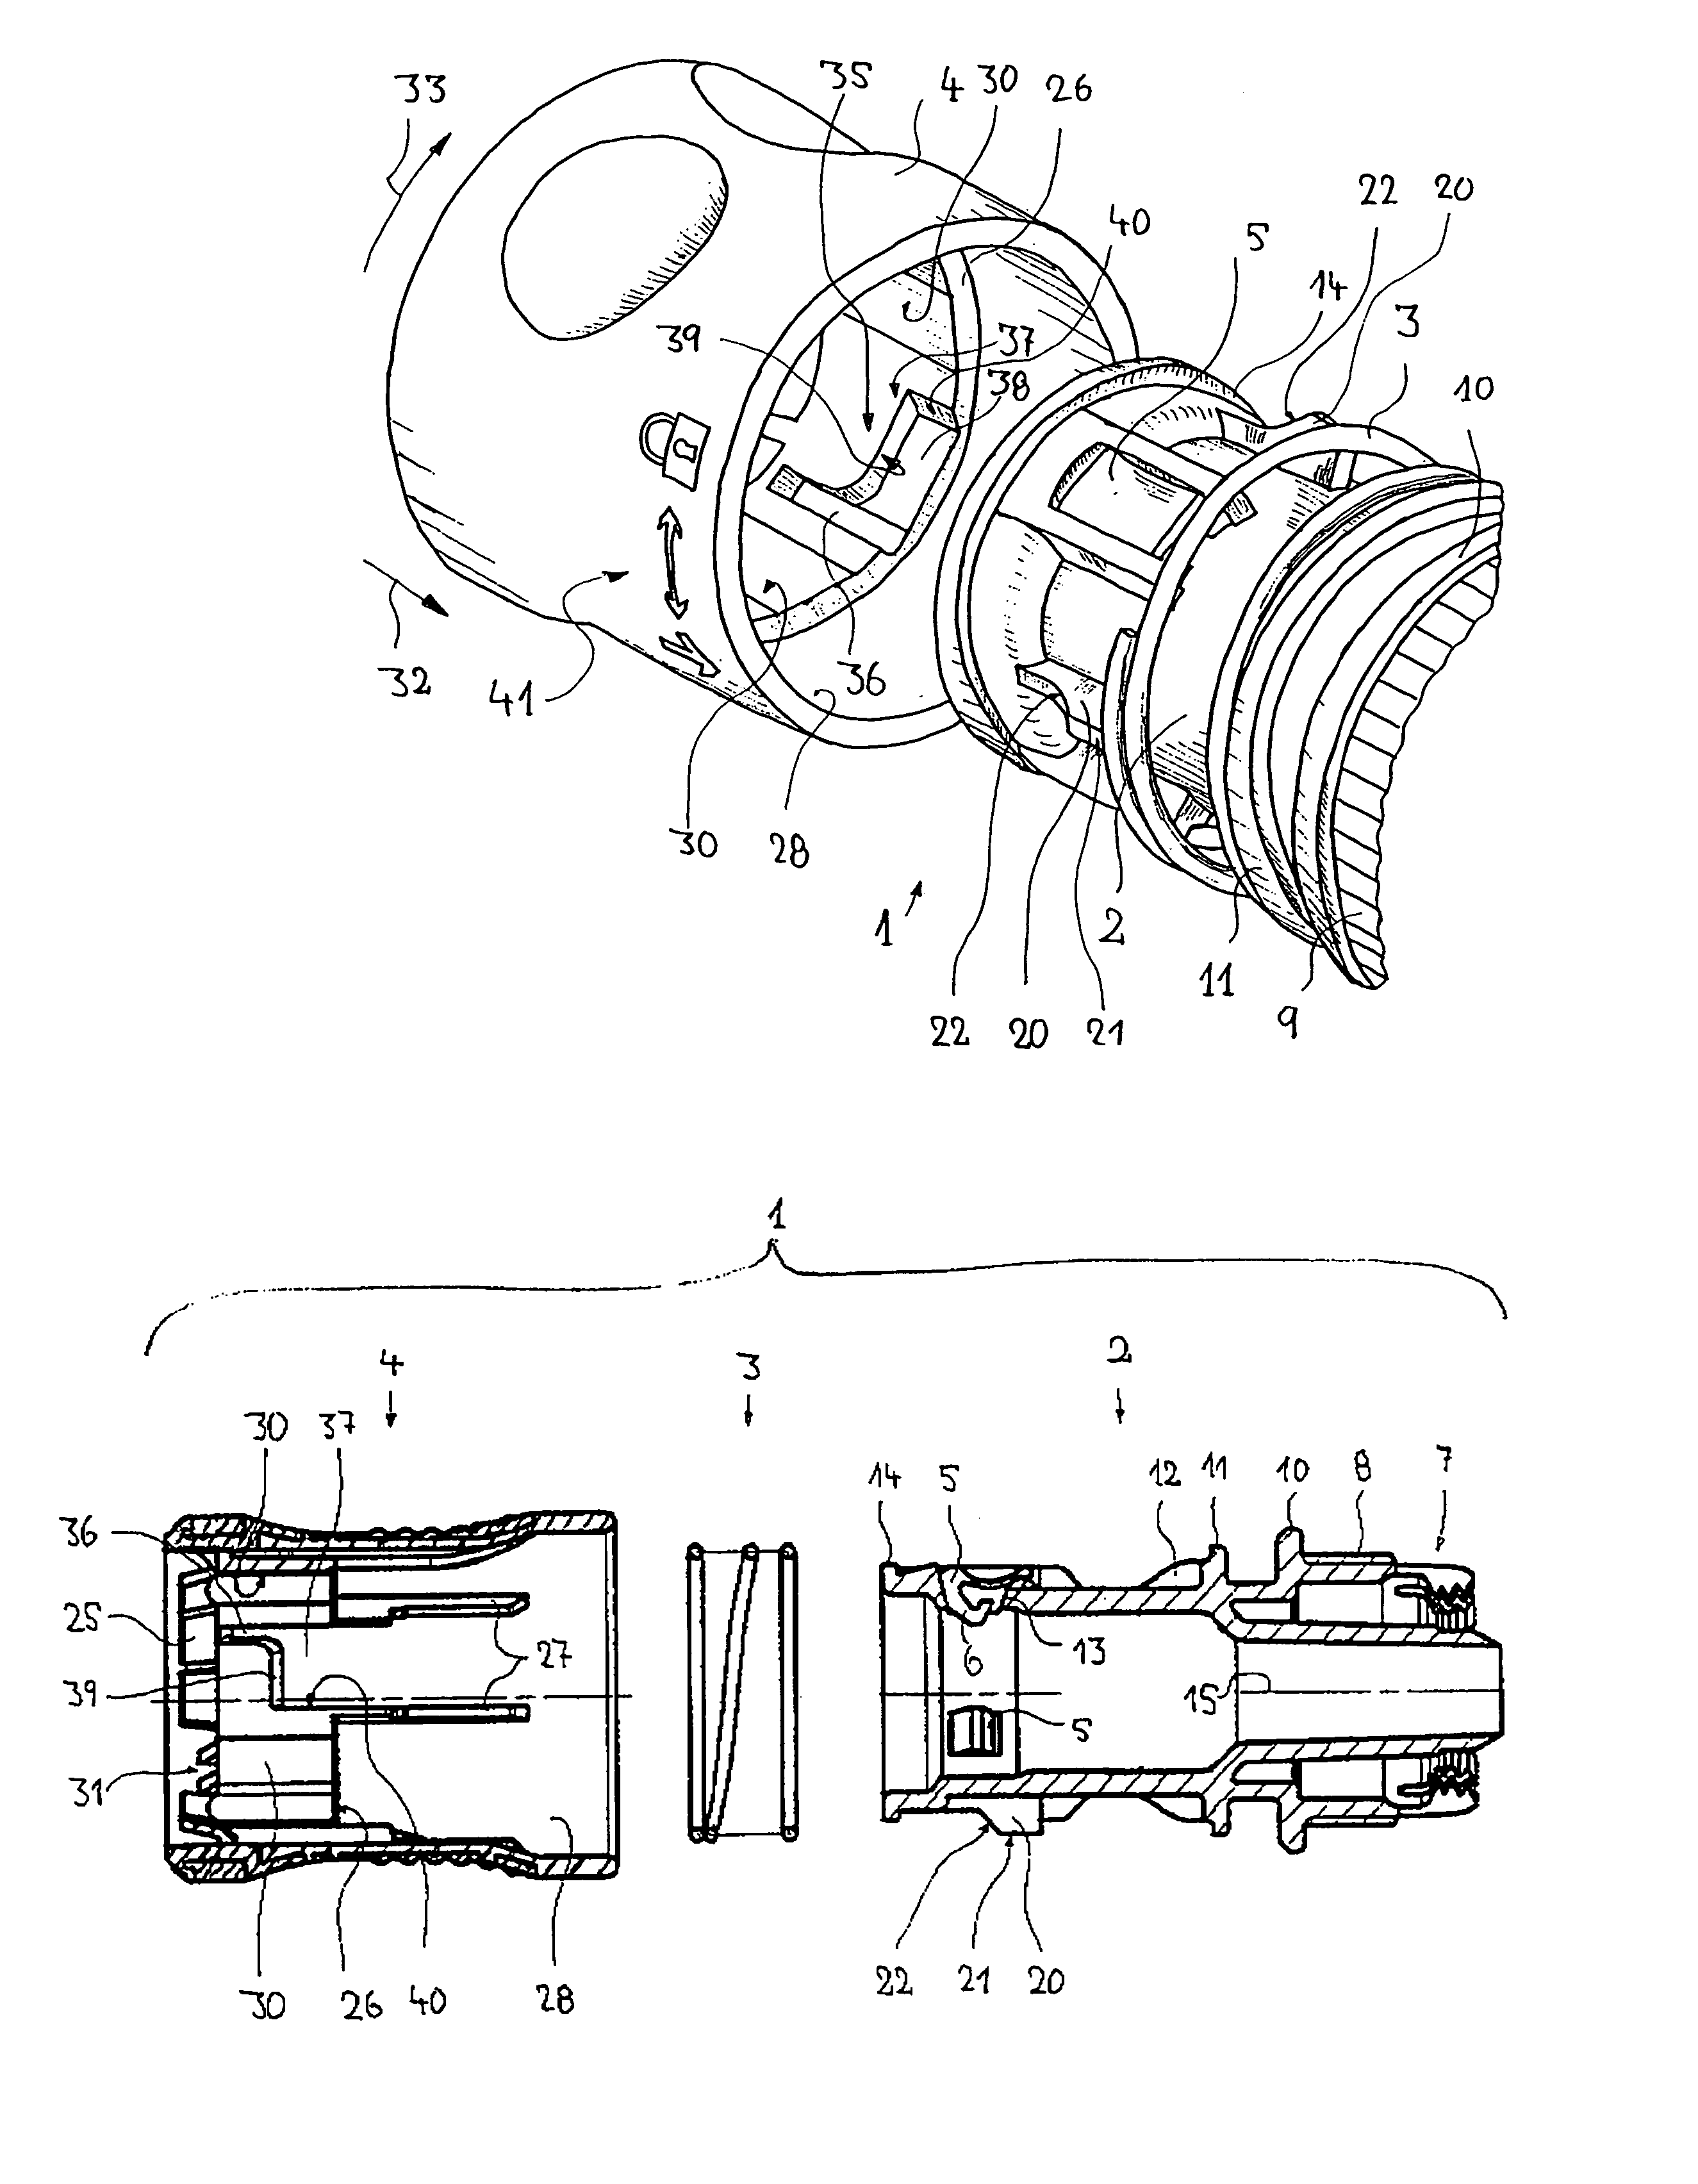 Coupling part for a fluid coupling device